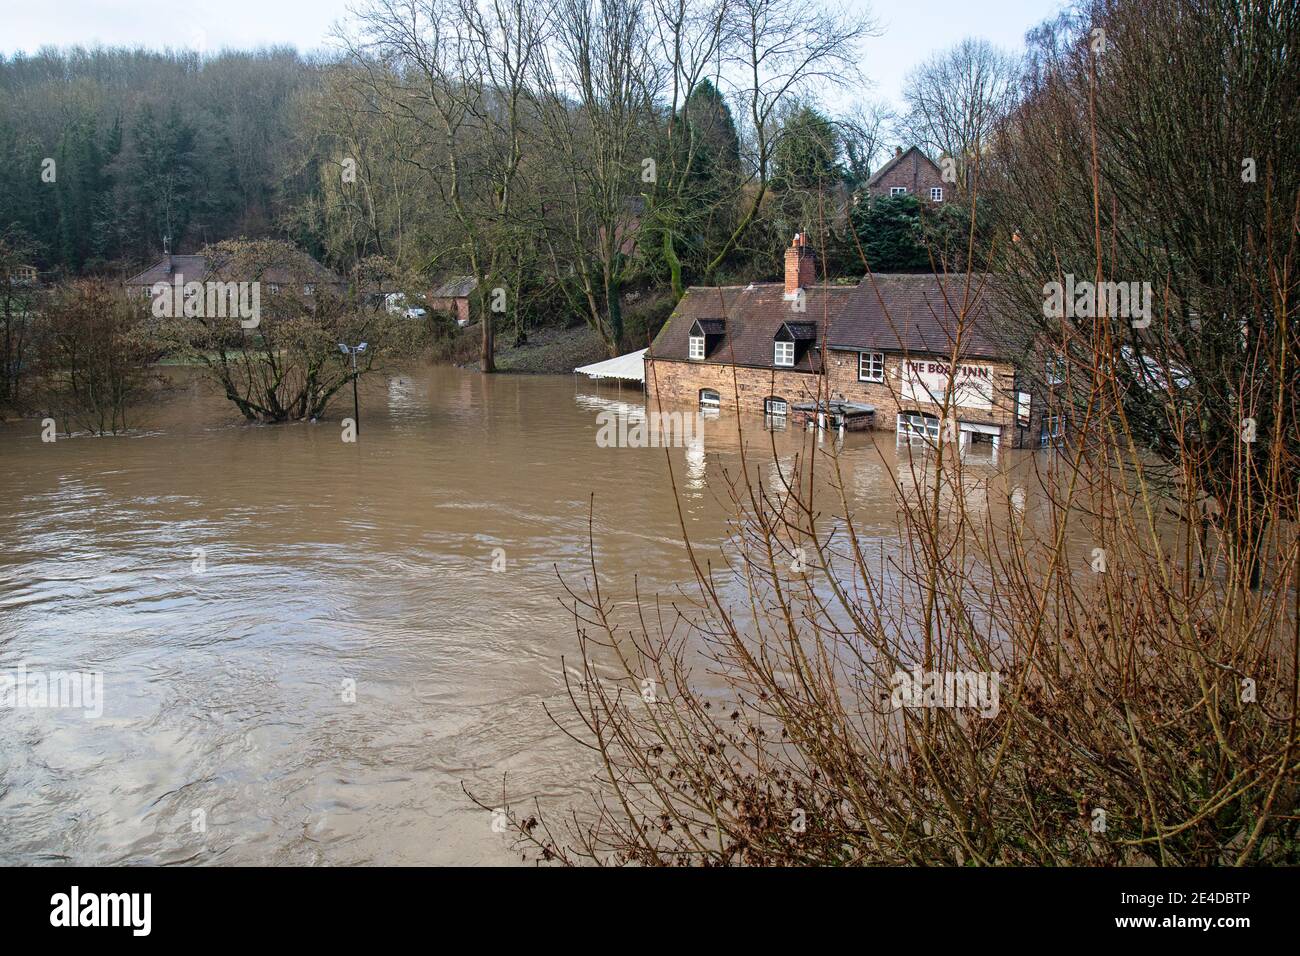 Shropshire, UK. 23rd Jan, 2021. Levels of the River Severn in Shropshire continued to rise overnight, causing sever floods in certain areas. The village of Jackfield in the Ironbridge Gorge World Heritage Site has been particularly badly hit, with homes and businesses badly flooded. Levels are very close to the records floods of February 2020. Credit: Rob Carter/Alamy Live News Stock Photo